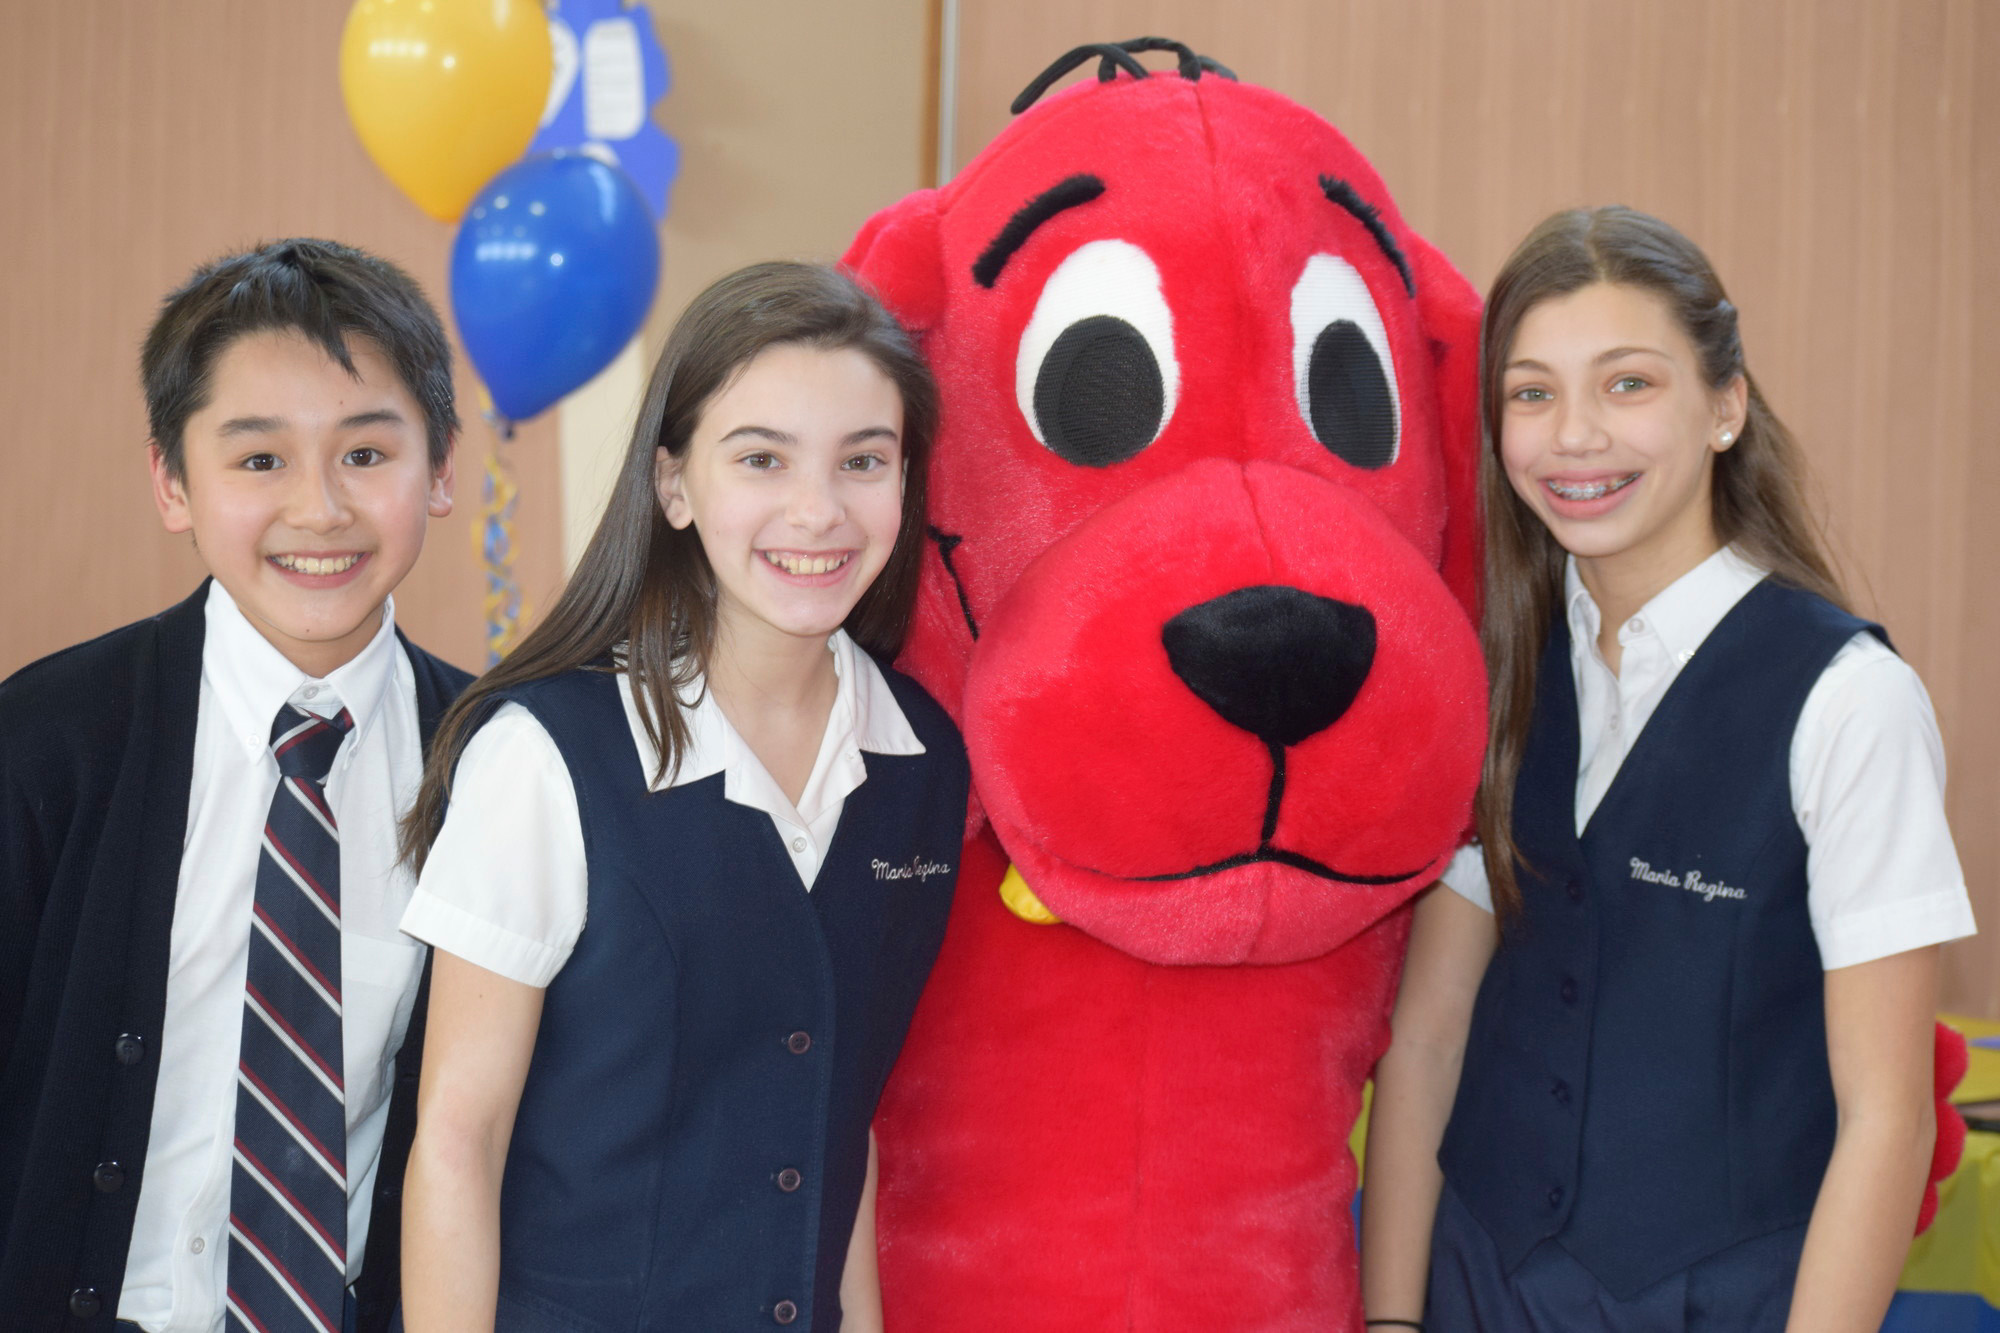 Daniel Hoang, 12, far left, Kimmy Purcell, 12, and Jamie Barrett, 12, had fun with Clifford the Big Red Dog at Maria Regina School’s open house last January.